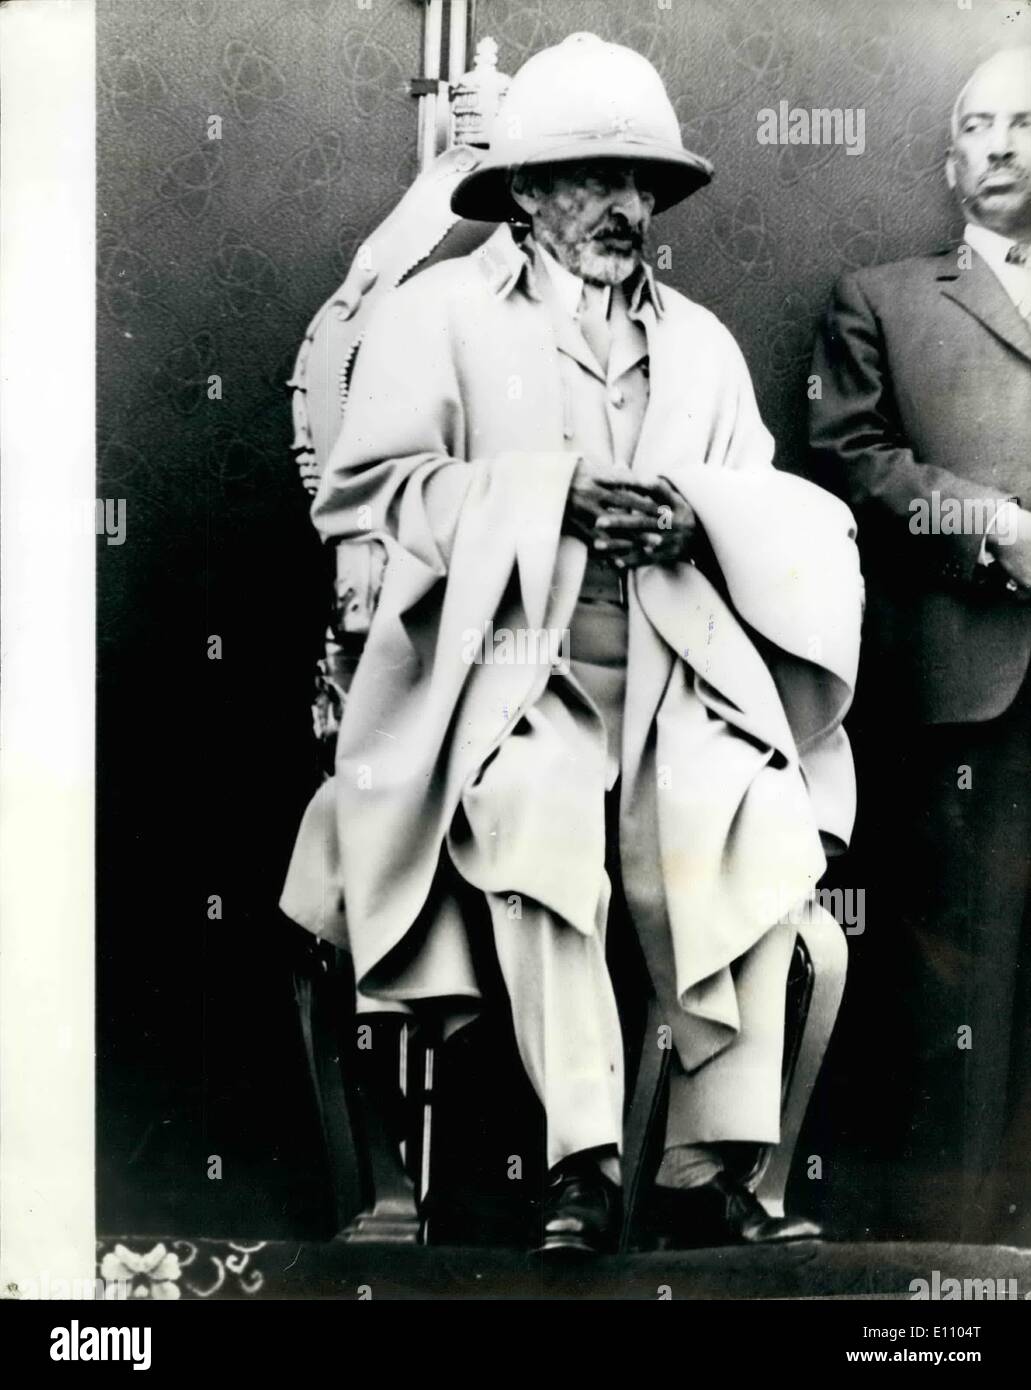 Sep. 12, 1974 - September 12th, 1974 Emperor Haile Selassie reported to have been deposed. Emperor Haile Selassie of Ethiopia was today reported to have been deposed by the country's armed forces committee. The Lion of Judah is 82. Photo Shows: Emperor Haile Selassie, seen in this latest picture, who is reported to have been deposed. Stock Photo